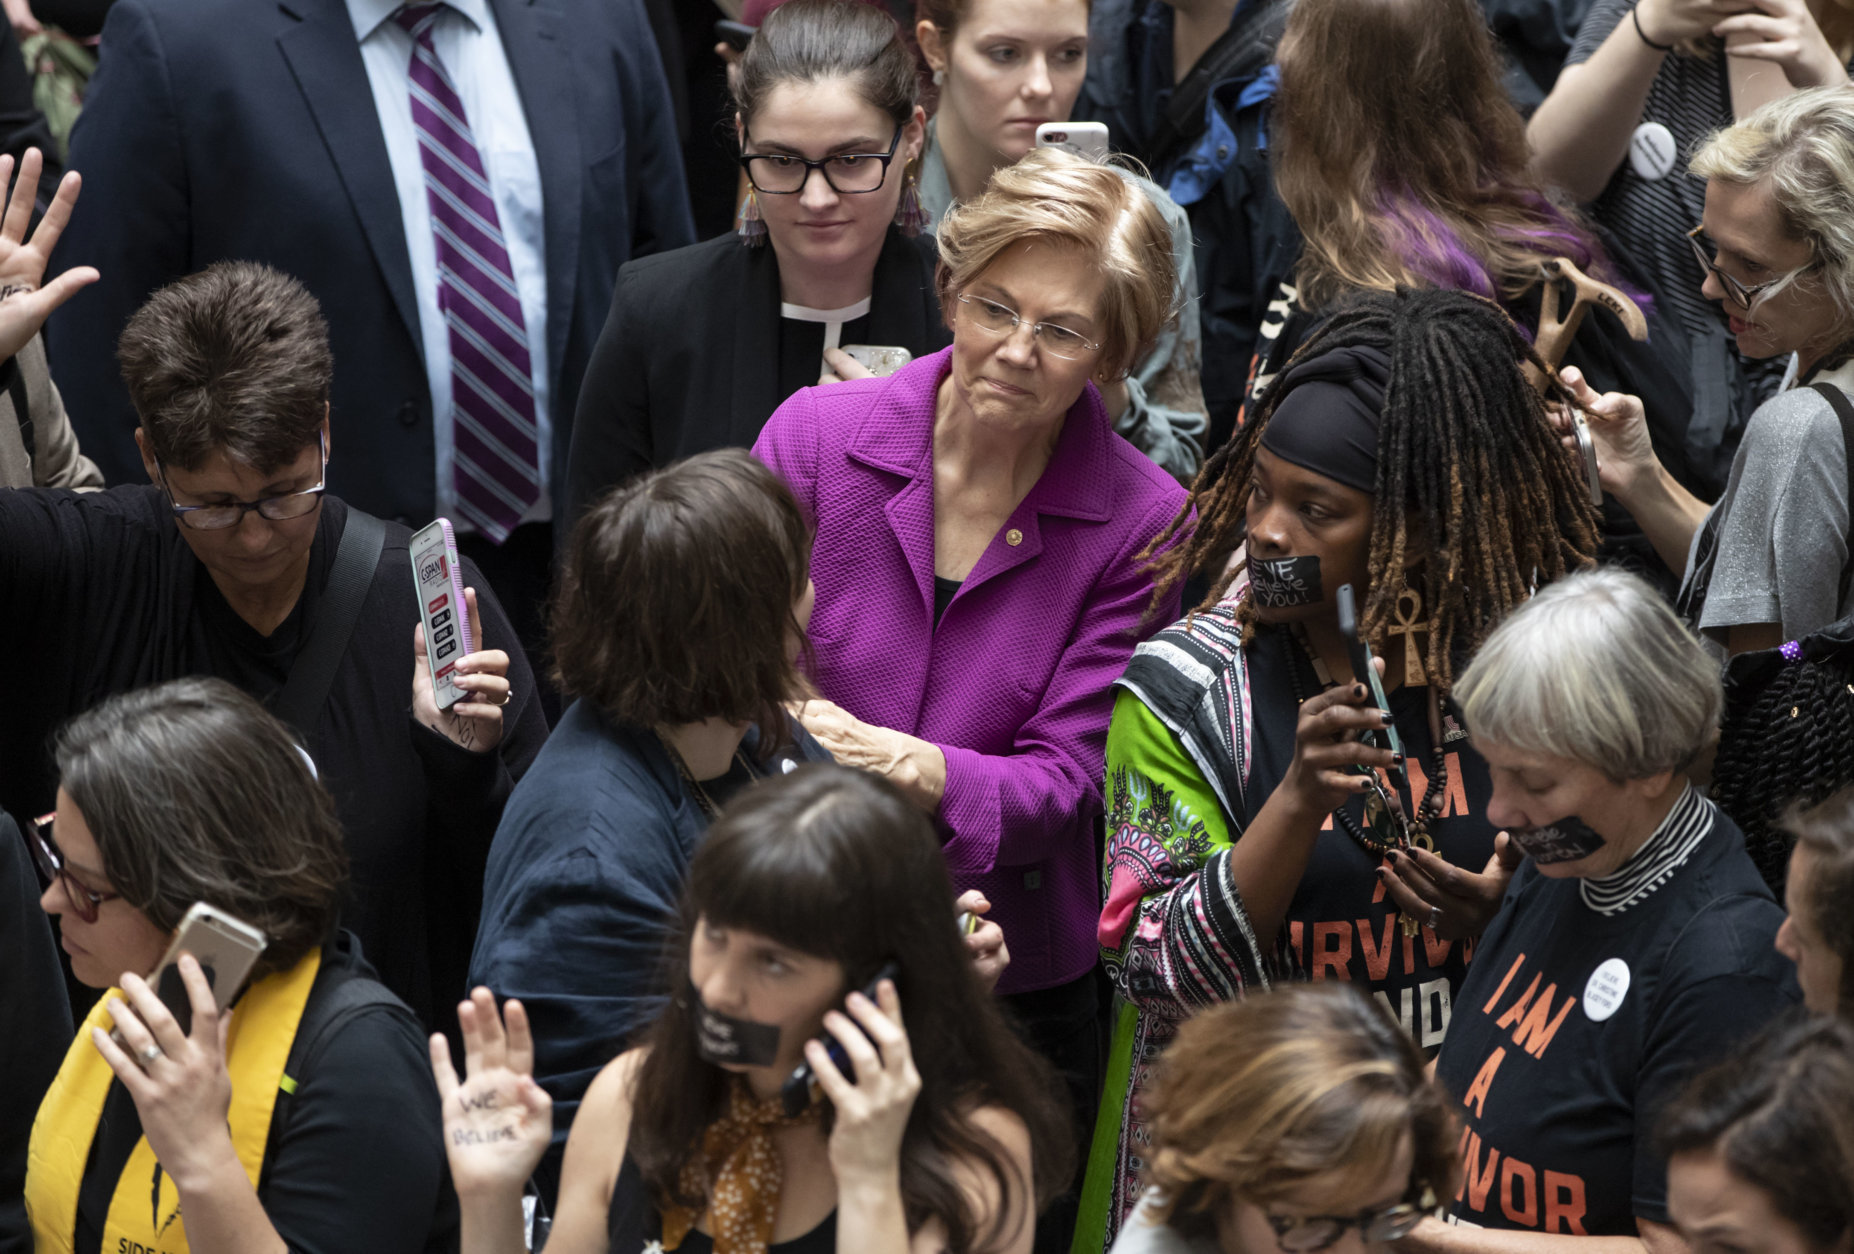 Sen. Elizabeth Warren, D-Mass., a vocal critic of Supreme Court nominee Brett Kavanaugh over the sexual harassment allegations made against him, greets womens' rights activists in the Hart Senate Office Building as the Senate Judiciary Committee hears from Kavanaugh and Christine Blasey Ford, his accuser, on Capitol Hill in Washington, Thursday, Sept. 27, 2018. (AP Photo/J. Scott Applewhite)